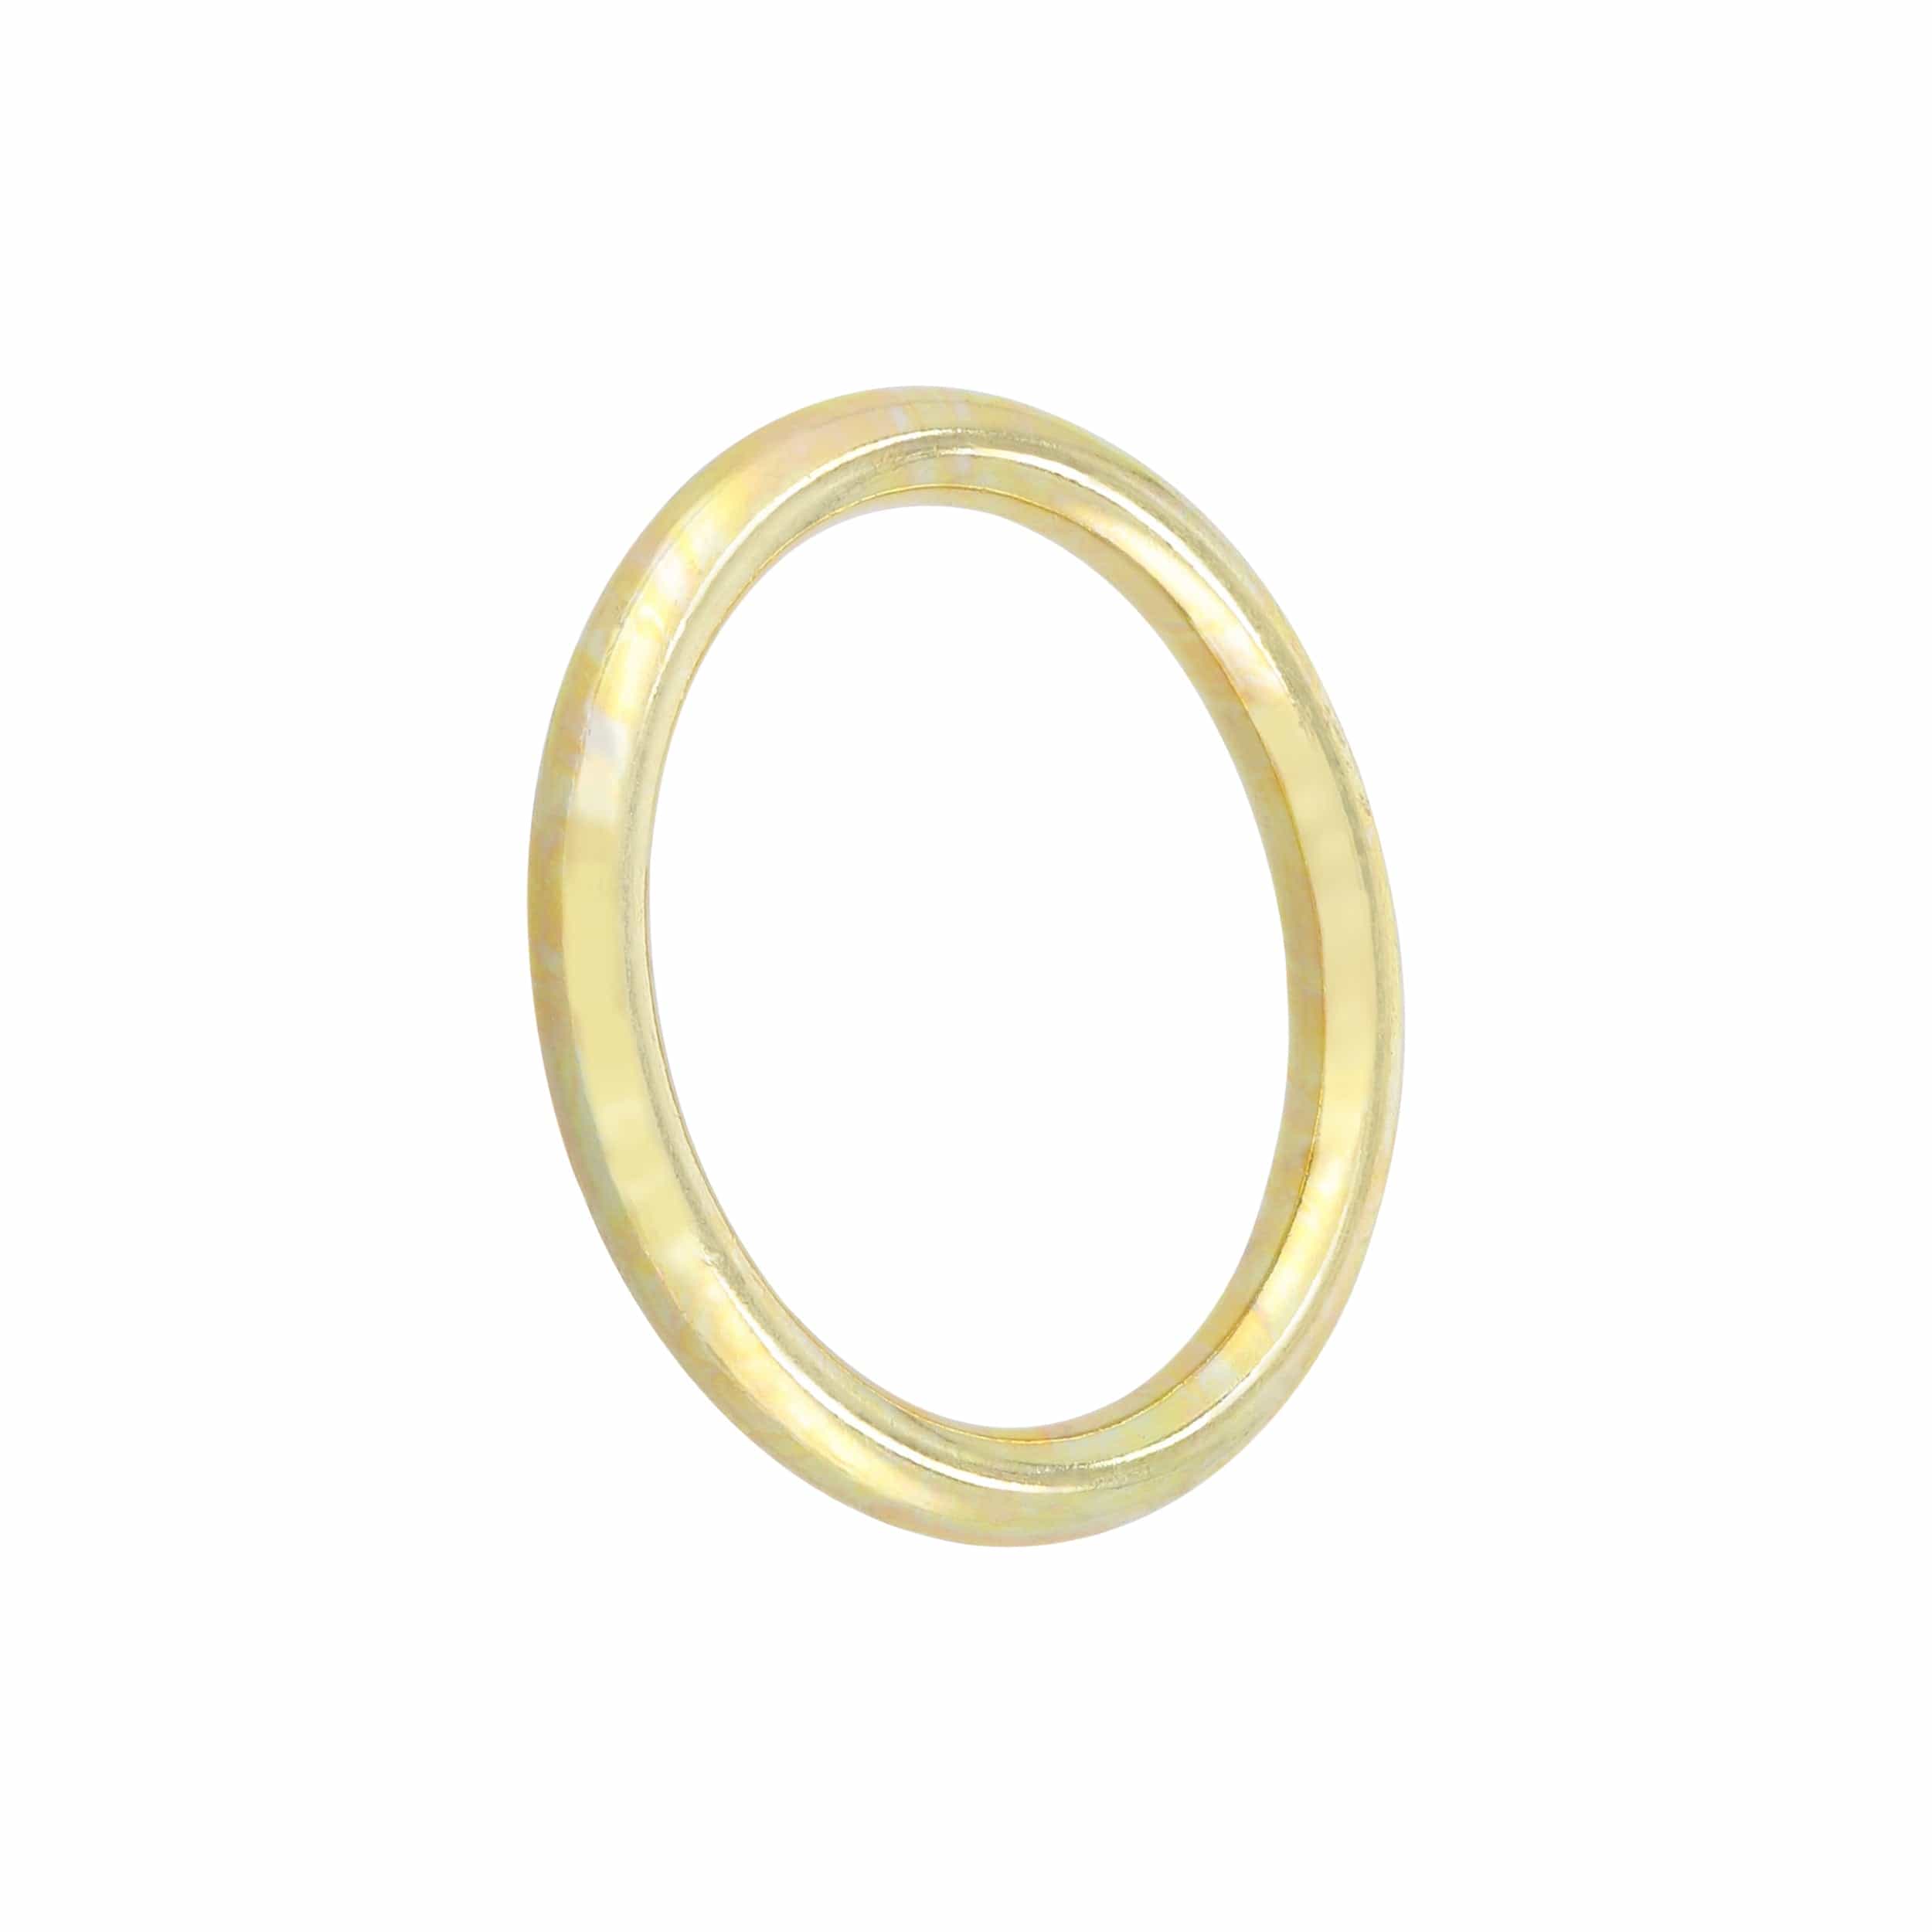 Ohio Travel Bag Rings & Slides 1 1/4" Shiny Brass, Solid Round Ring, Zinc Alloy, #A-235-BP A-235-BP